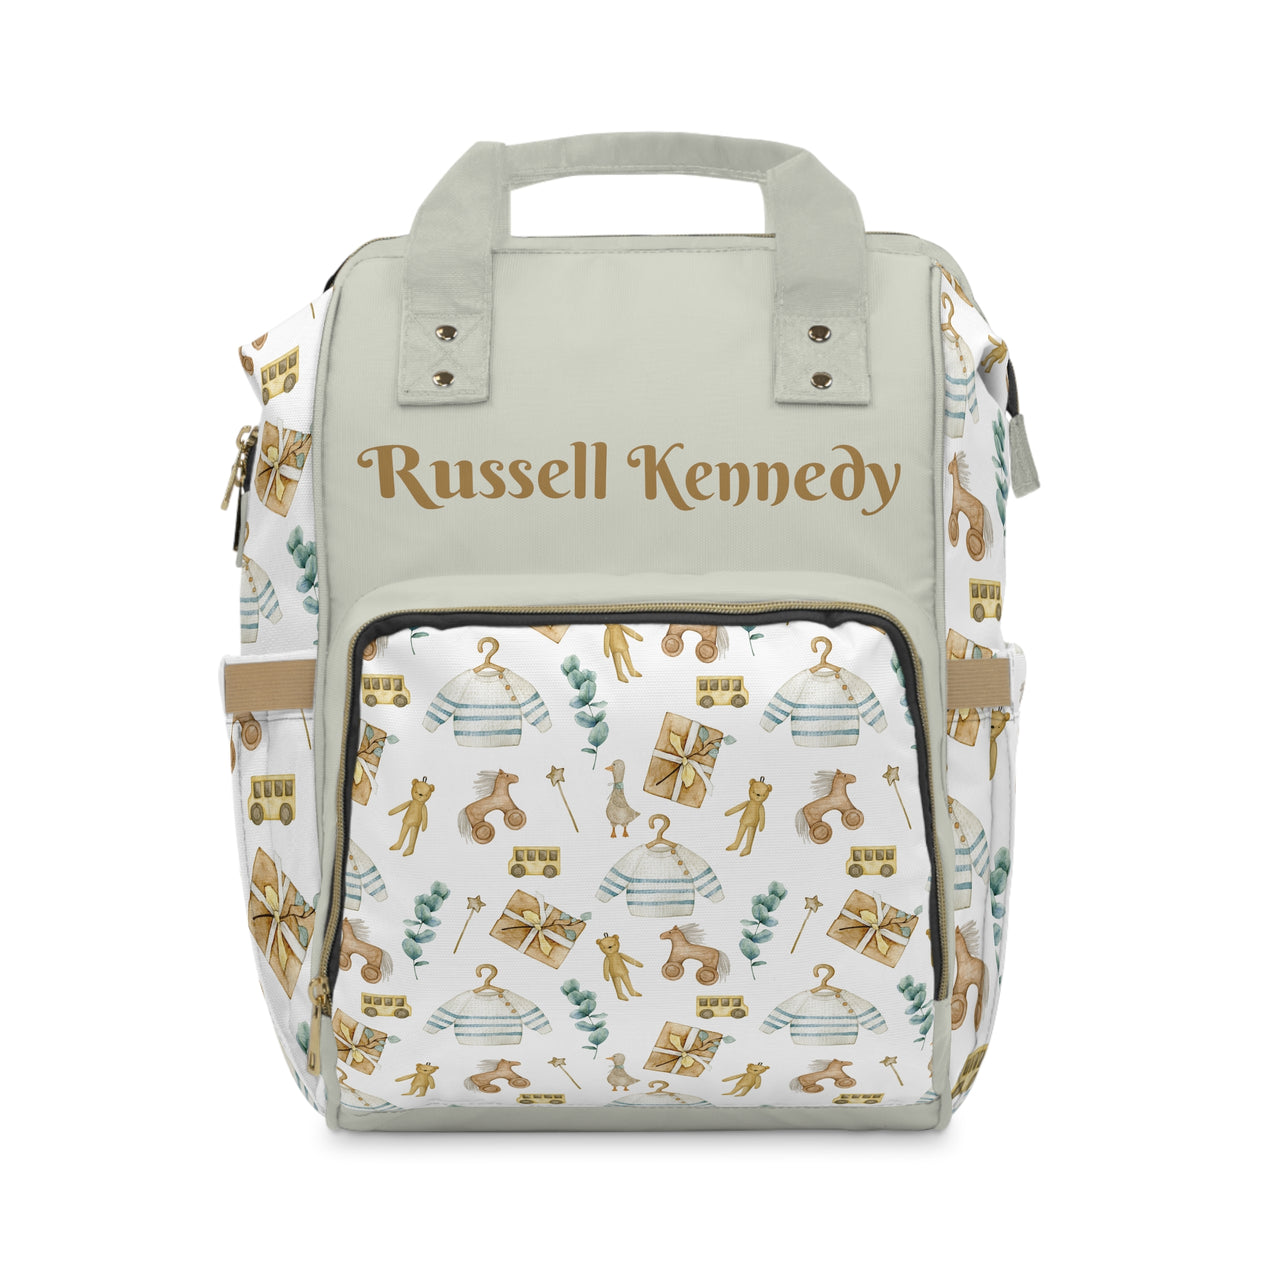 Personalized Baby Boy Pattern Multifunctional Diaper Backpack, Newborn Gift, Baby Shower Gift, Toy Themed Babyshower